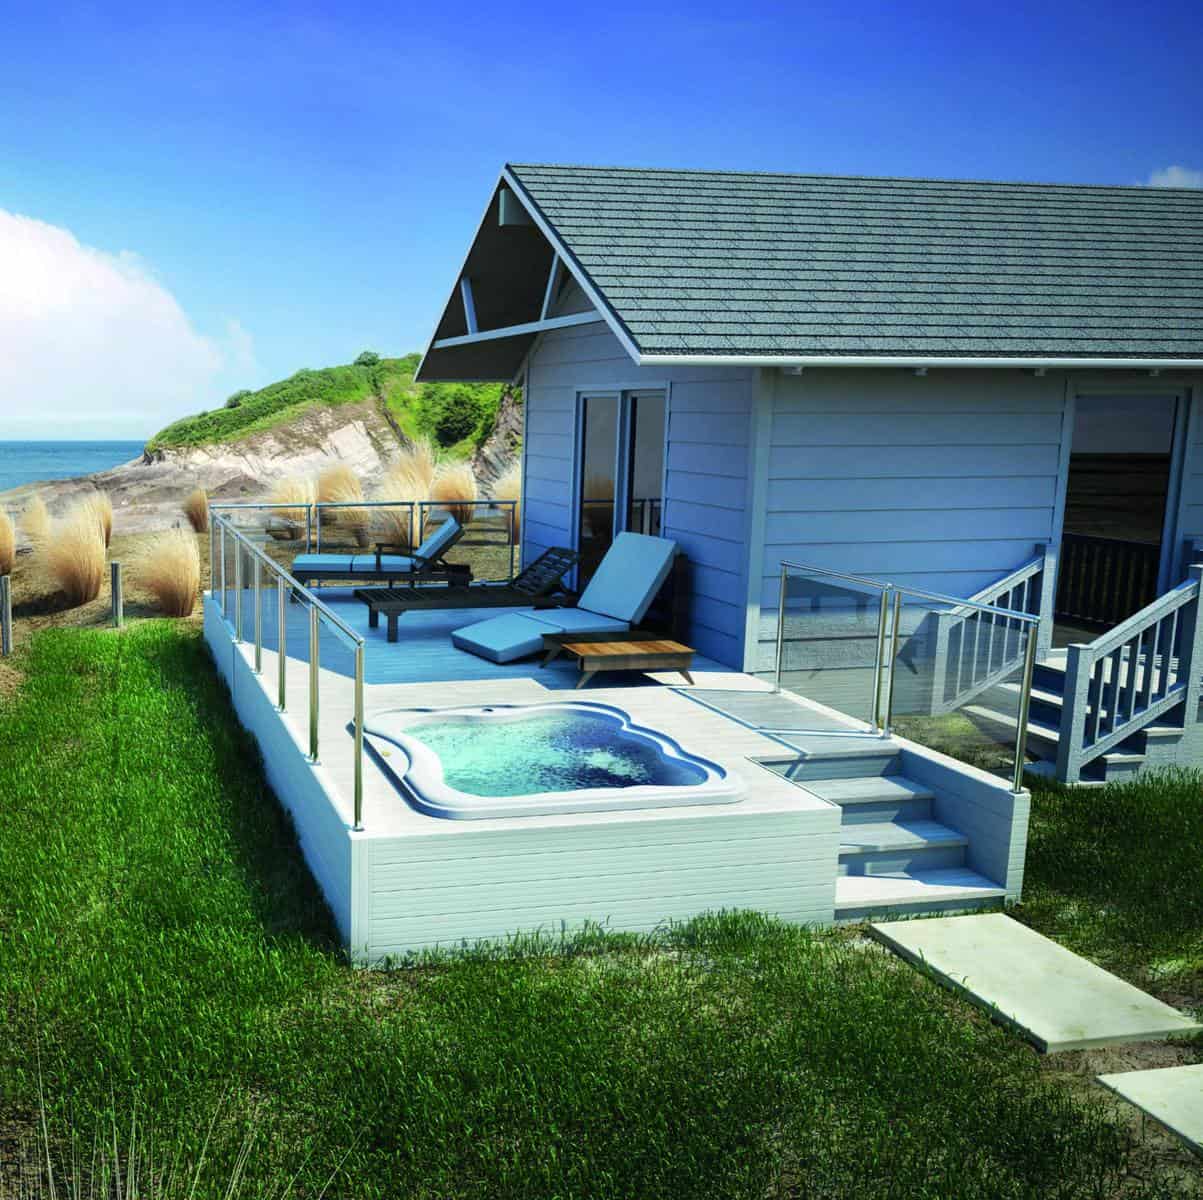 Should you invest in a Jacuzzi for your B&B?